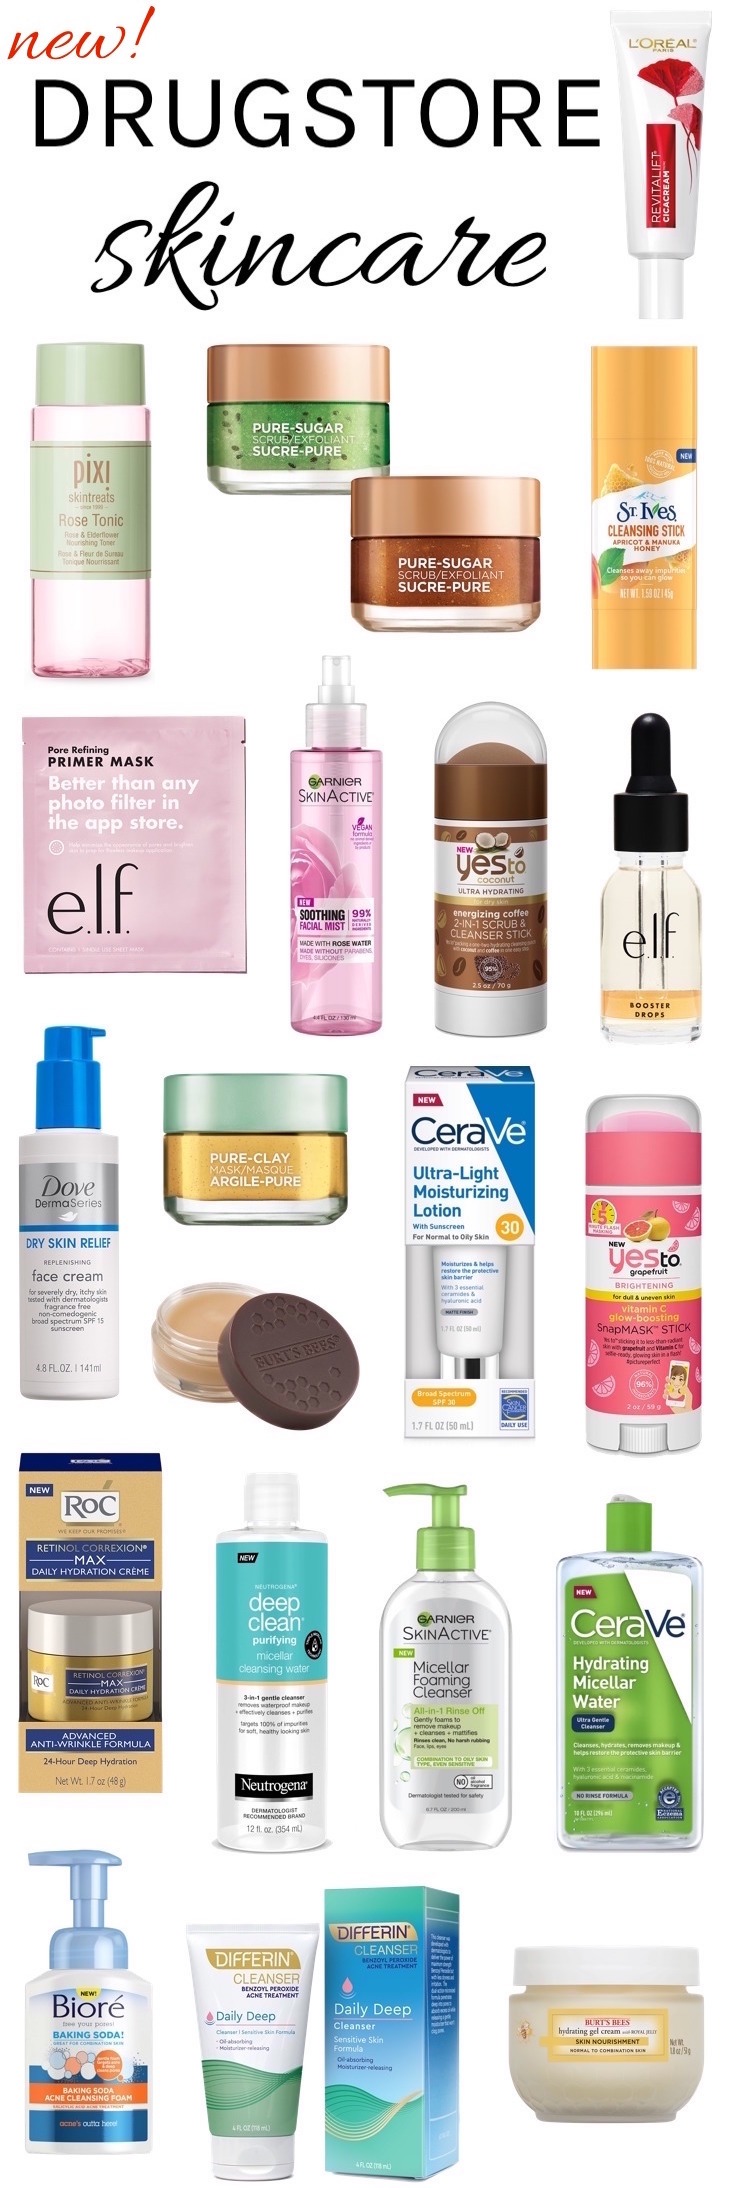 Finding yourself spent after the holidays? Save now with these NEW drugstore skincare products that you can snag for under $20 each! 